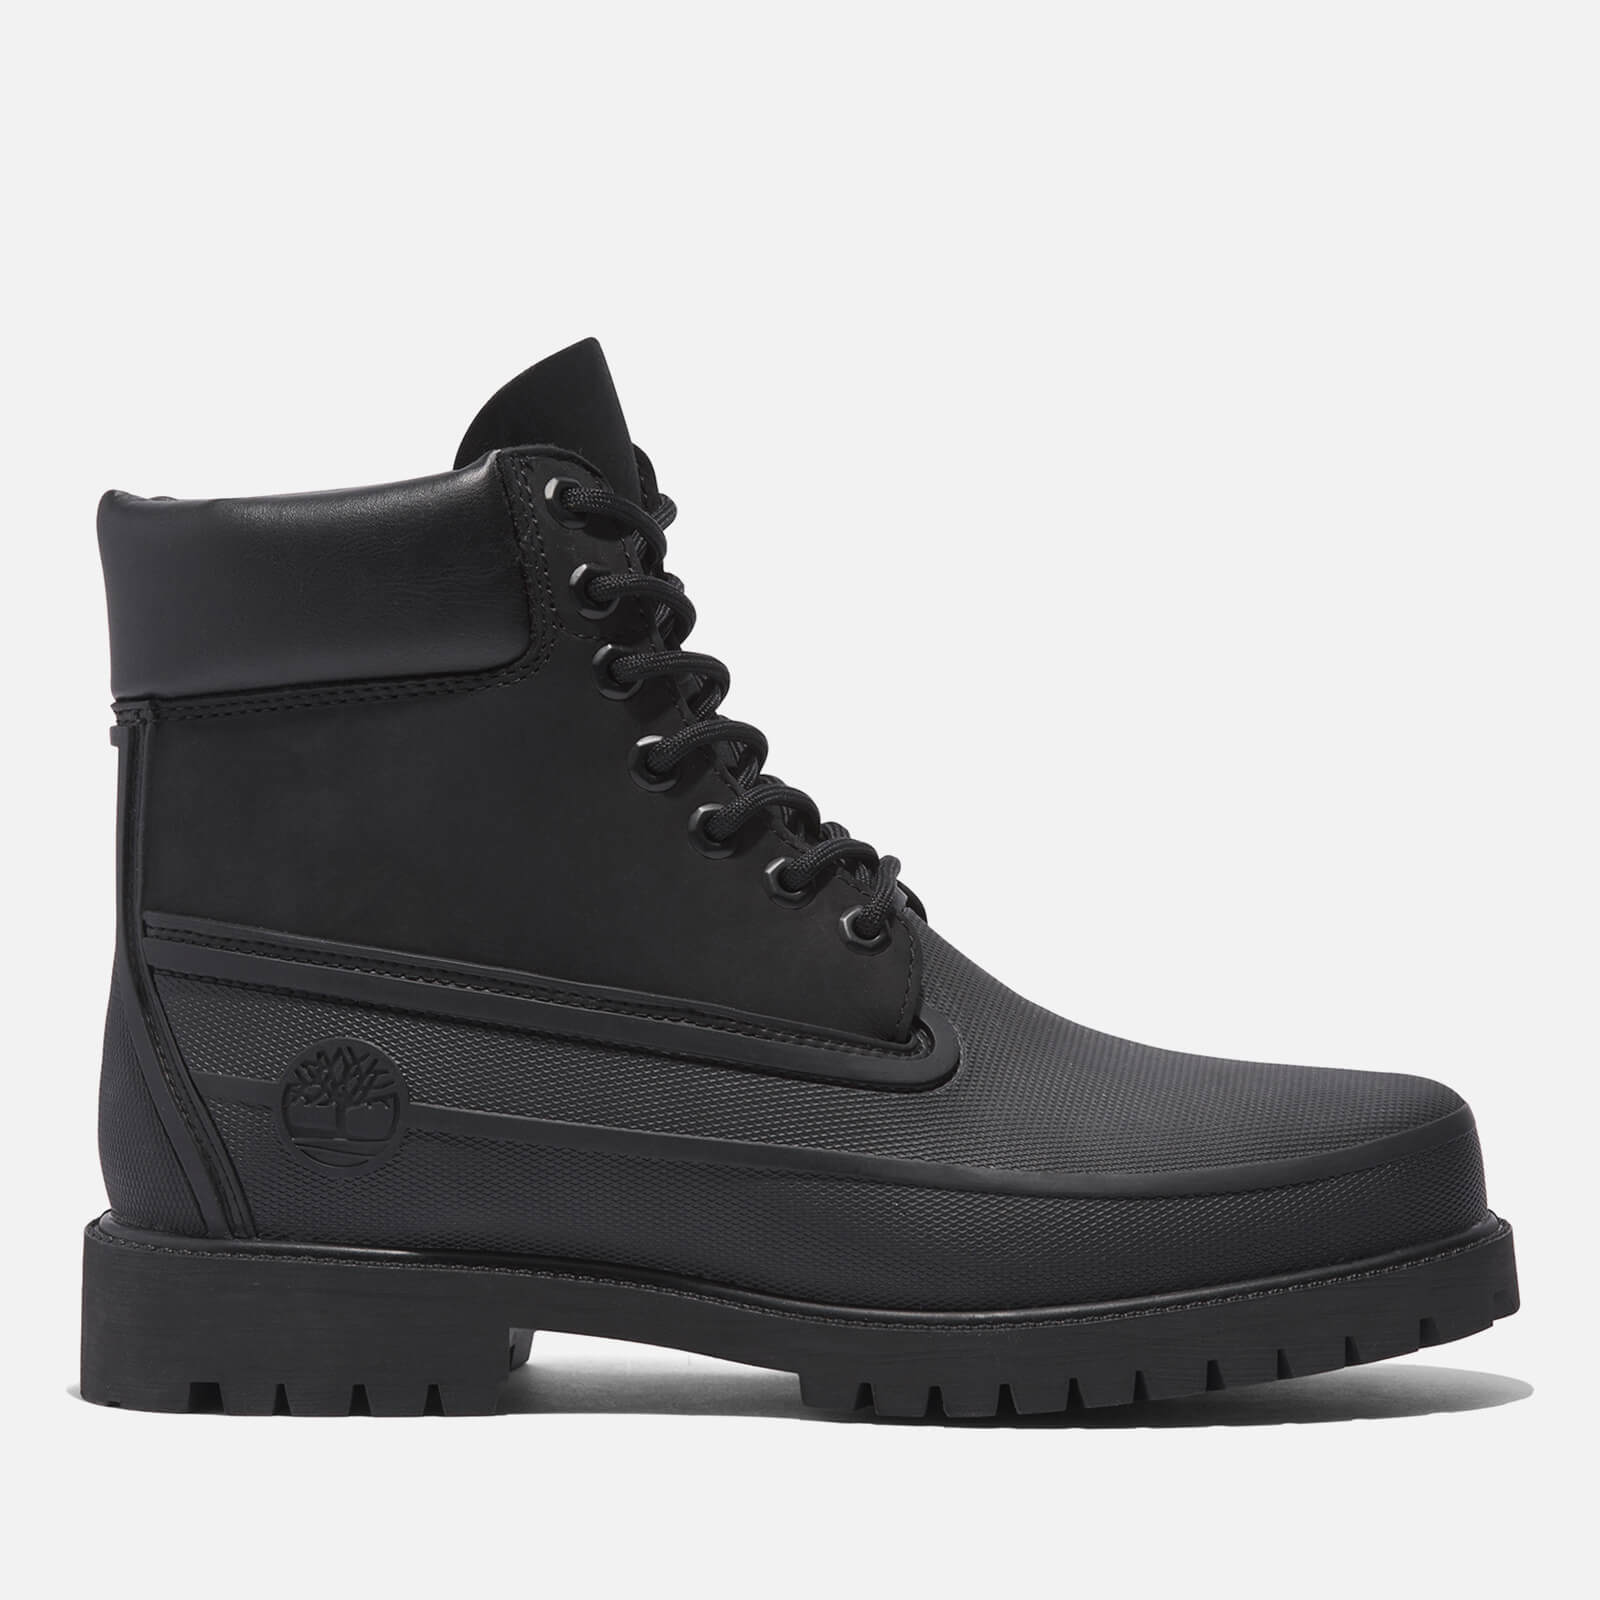 Timberland Men’s Nubuck and Leather Ankle Boots